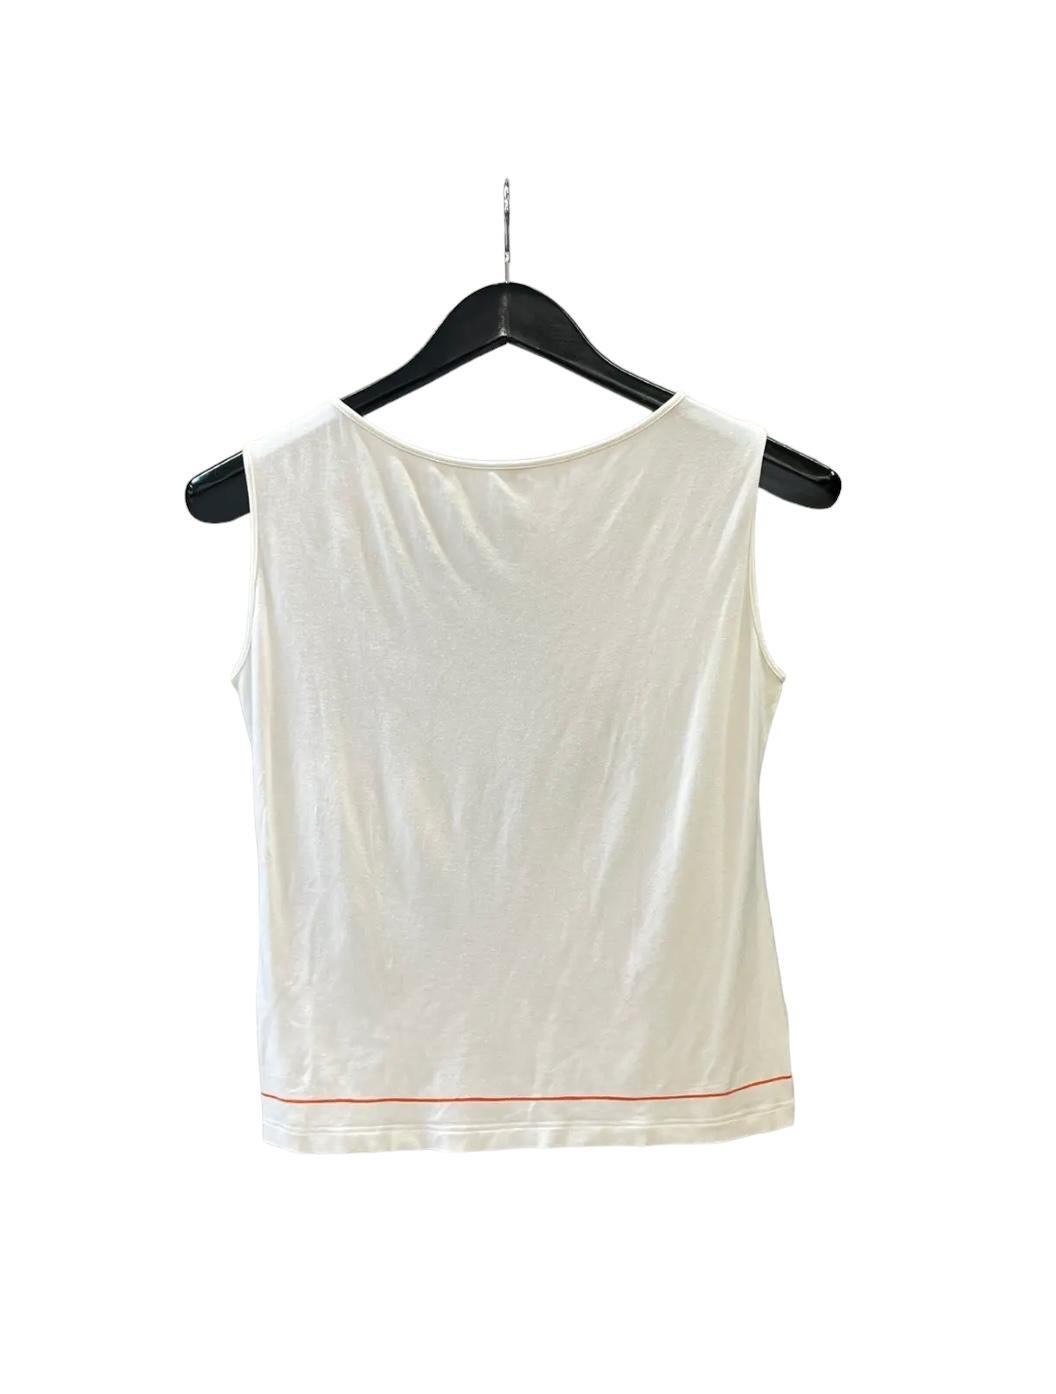 Hermes Margiela
SS03 Cheval Surprise Tank Top
Size Small

Beautiful Hermes Margiela 2003 Spring Summer tank top. In great condition without flaws.